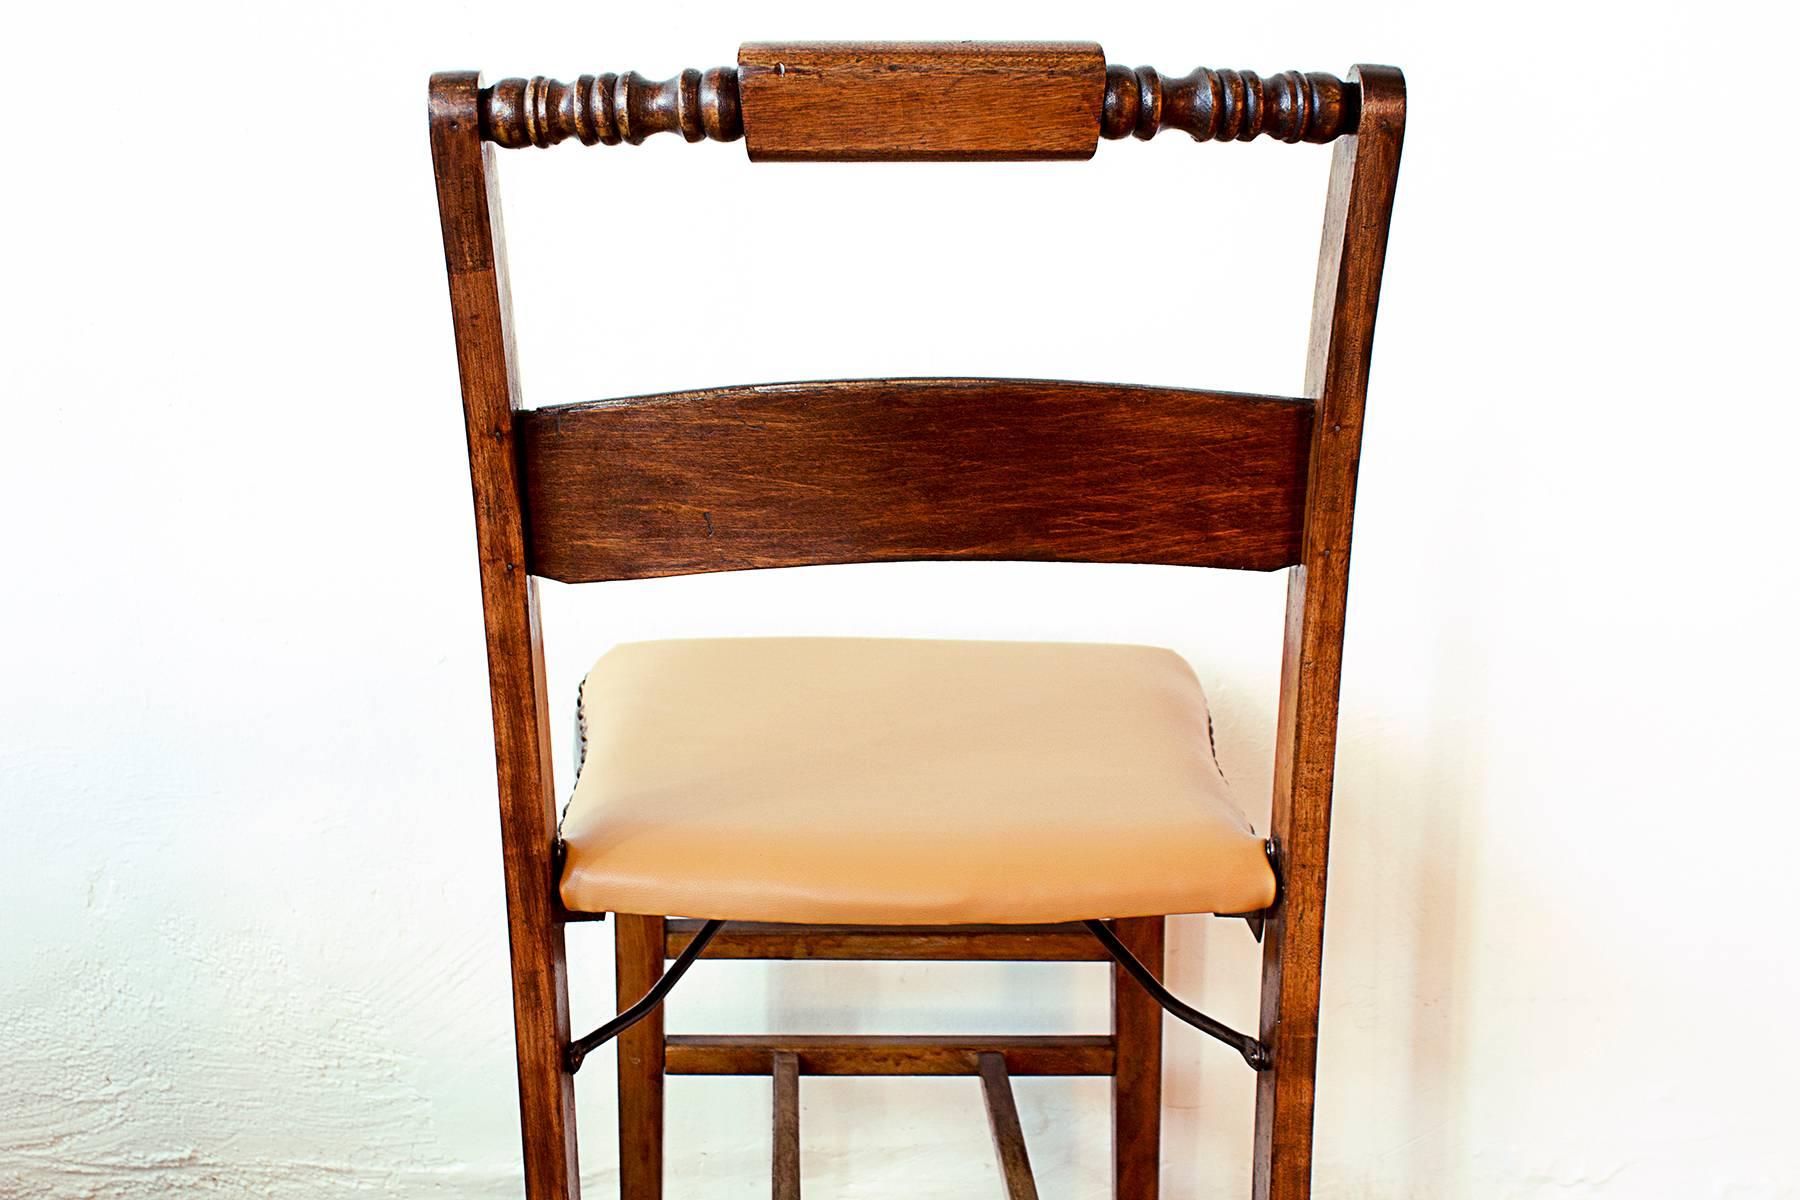 Mission Set of Two Antique Folding Wood Chairs, circa 1930s